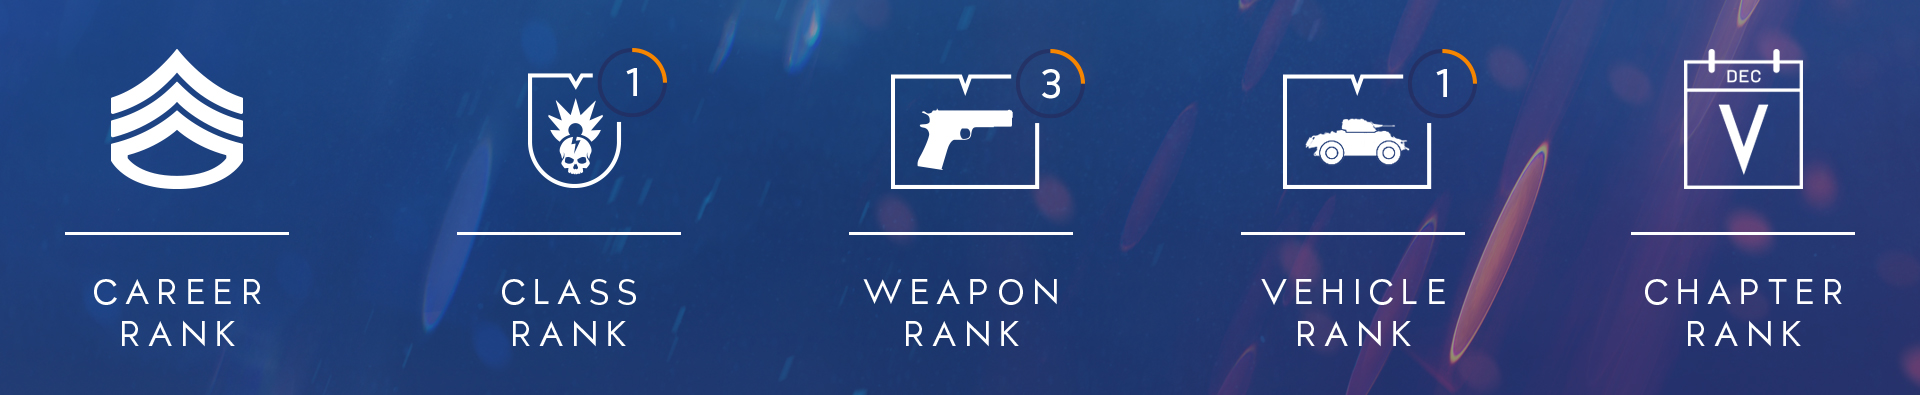 Battlefield V Currency Oct 2018 #1